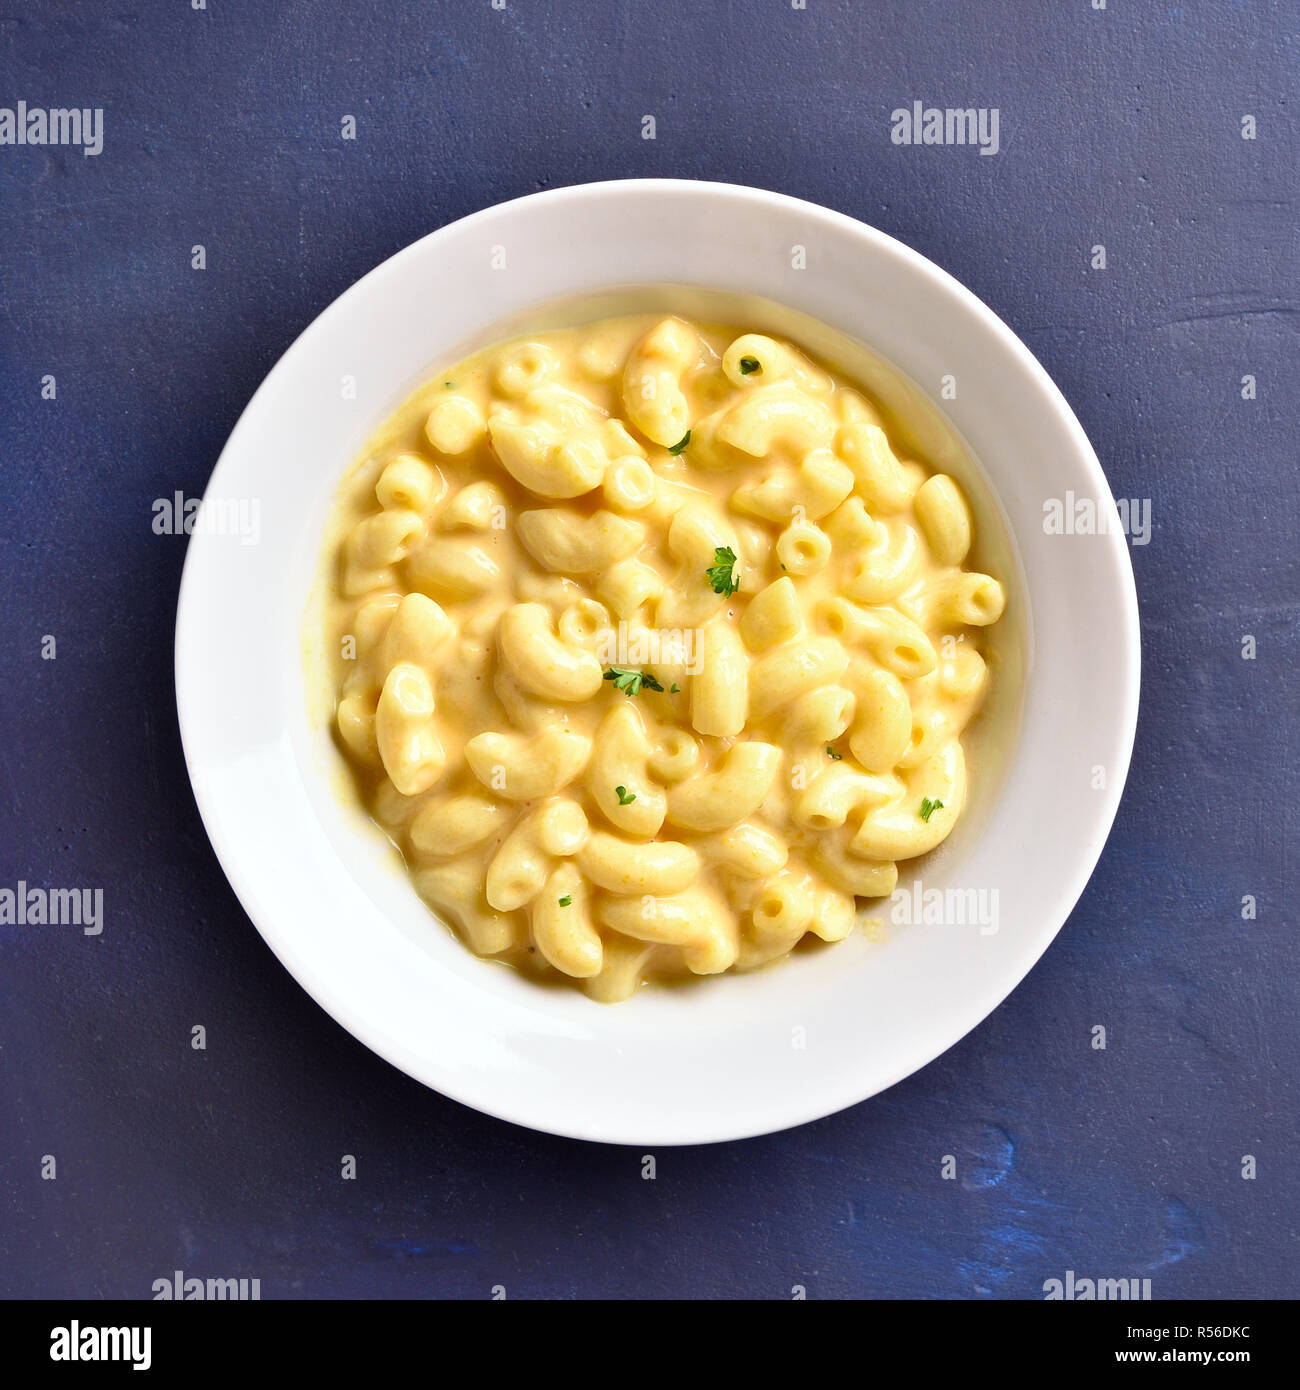 Macaroni and cheese in white bowl on blue stone background. Top view, flat lay Stock Photo